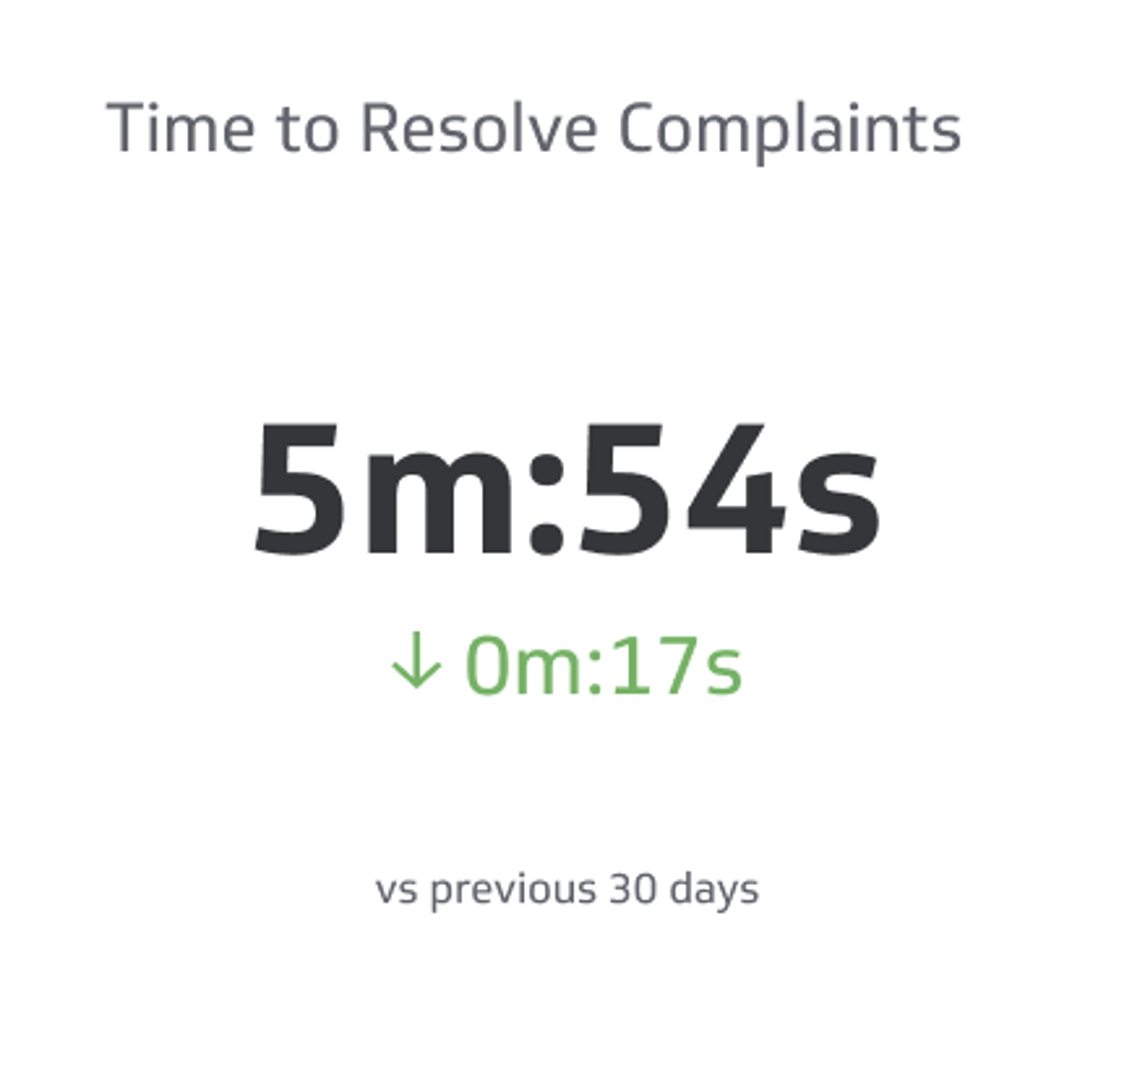 Related KPI Examples - Time to Resolve Complaints Metric